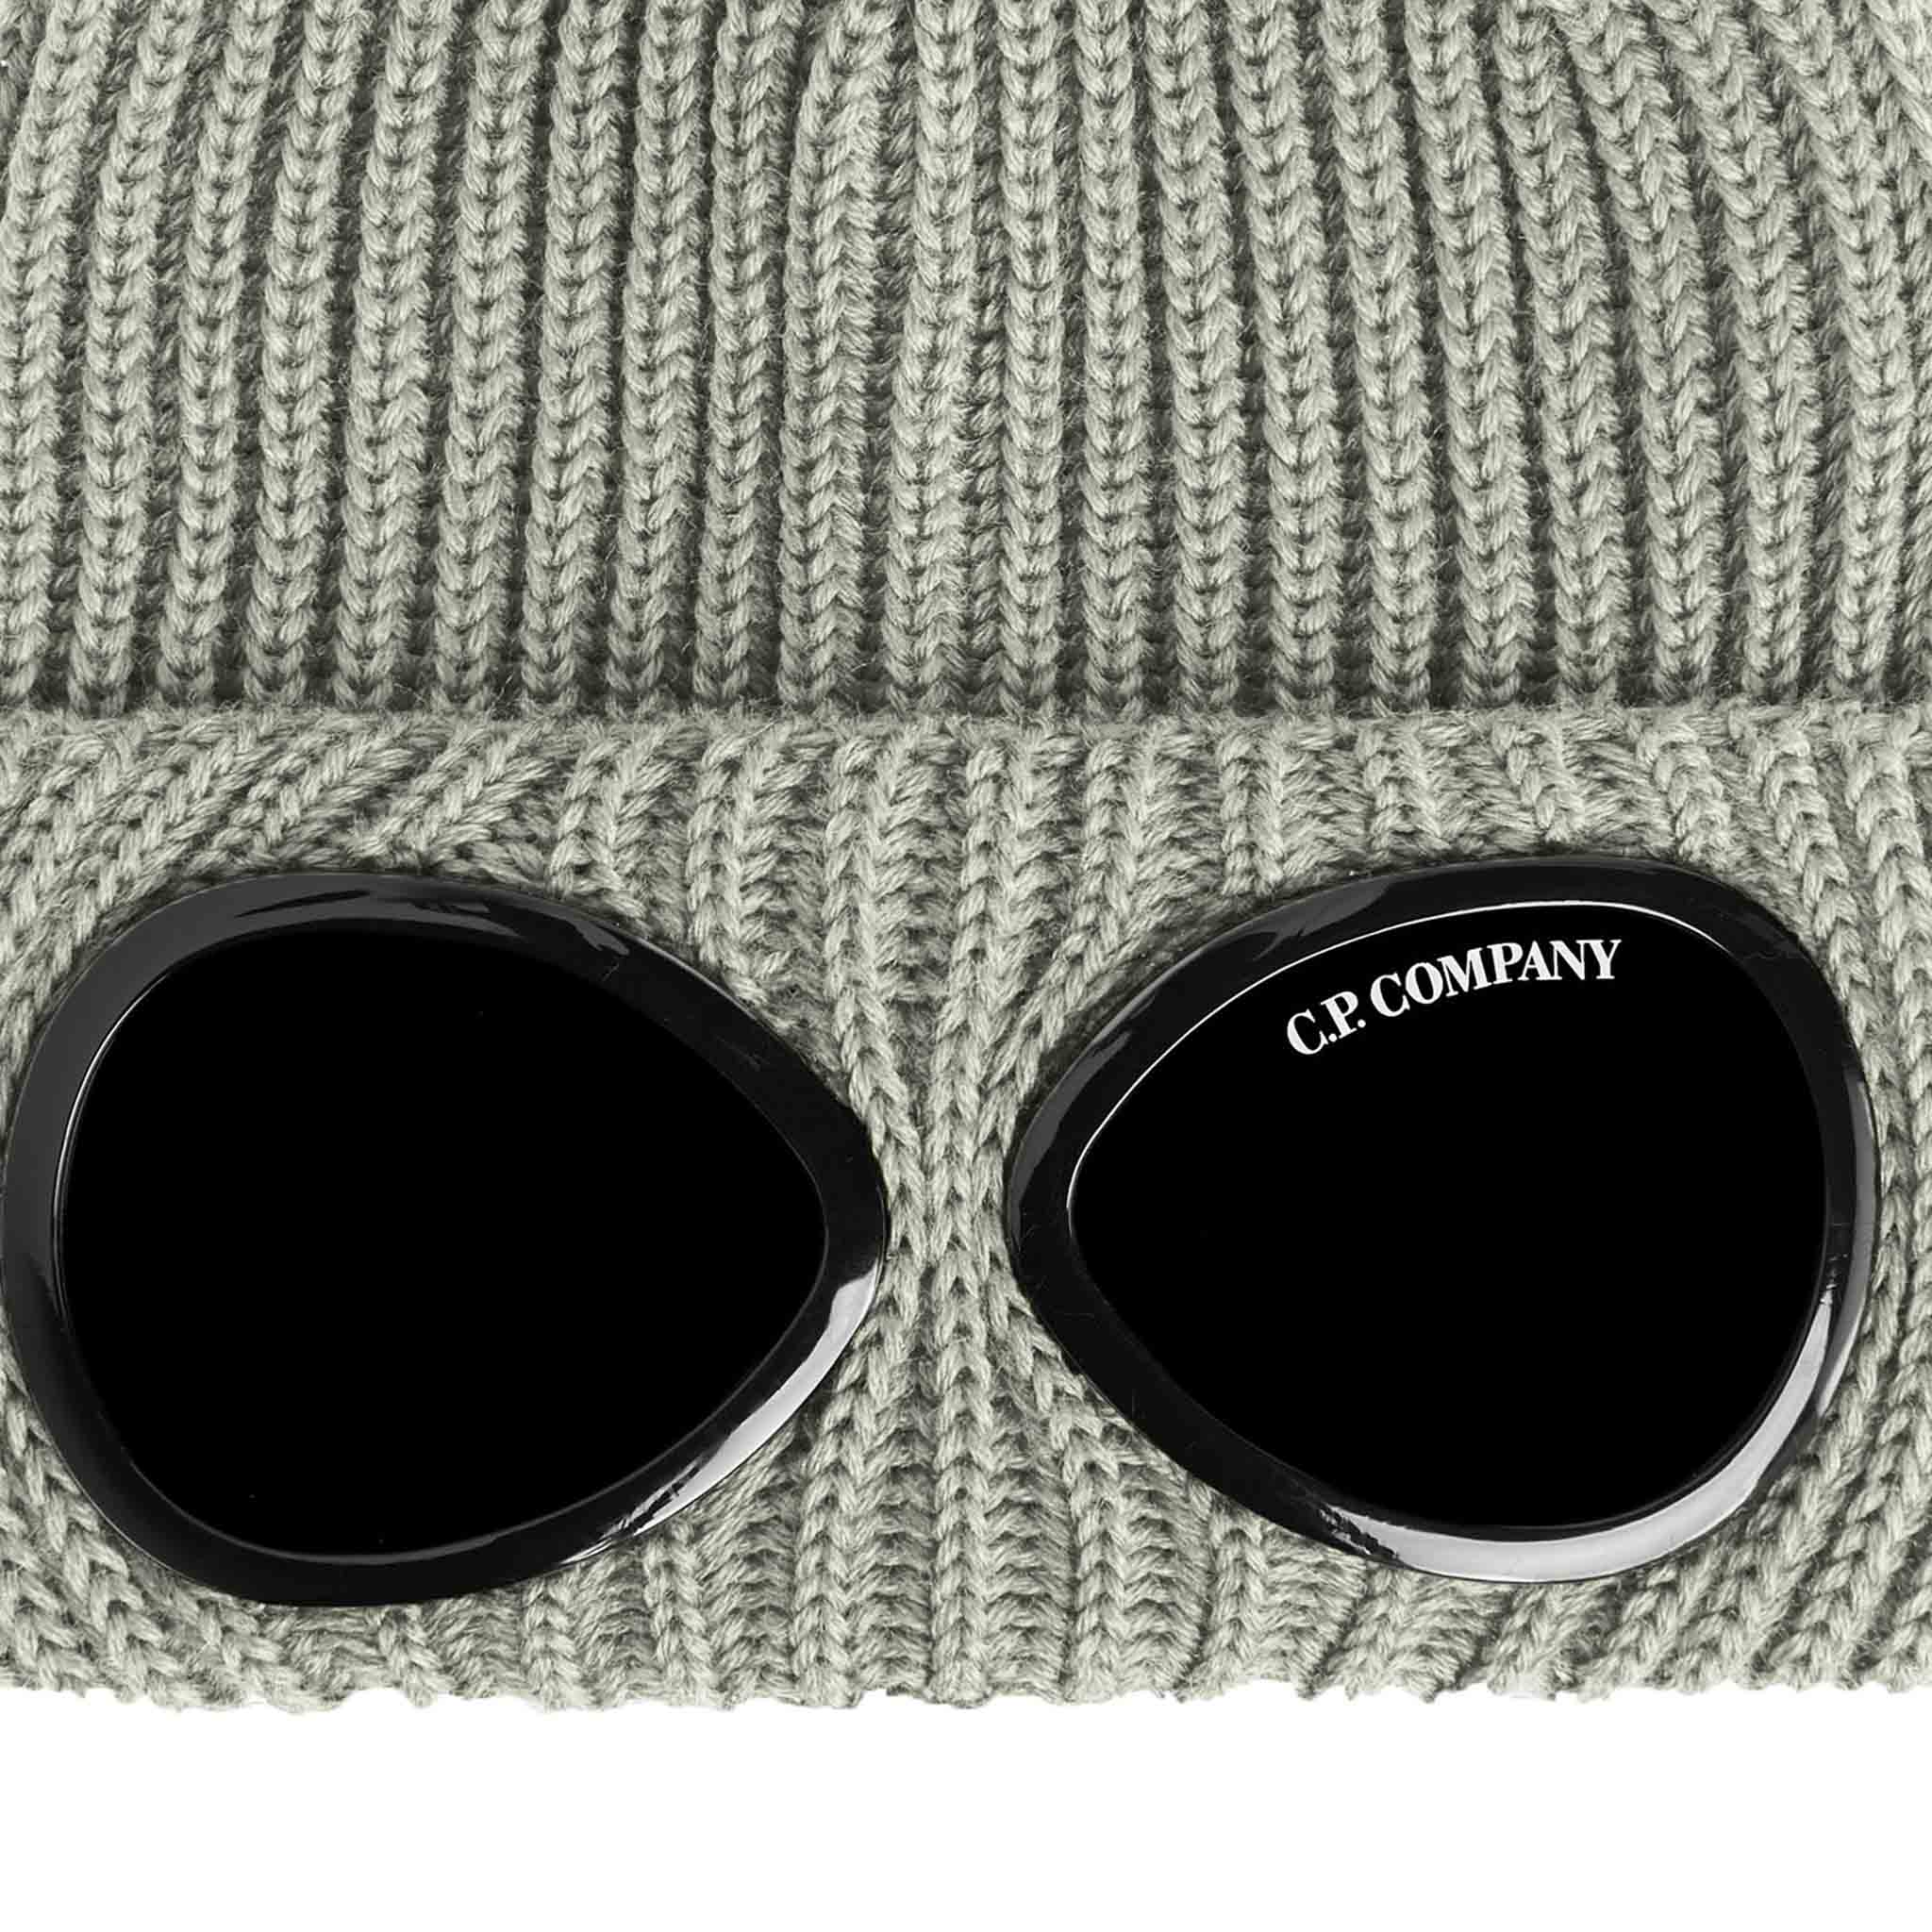 C.P. Company Extra Fine Merino Wool Goggle Beanie in Silver Sage- Brown